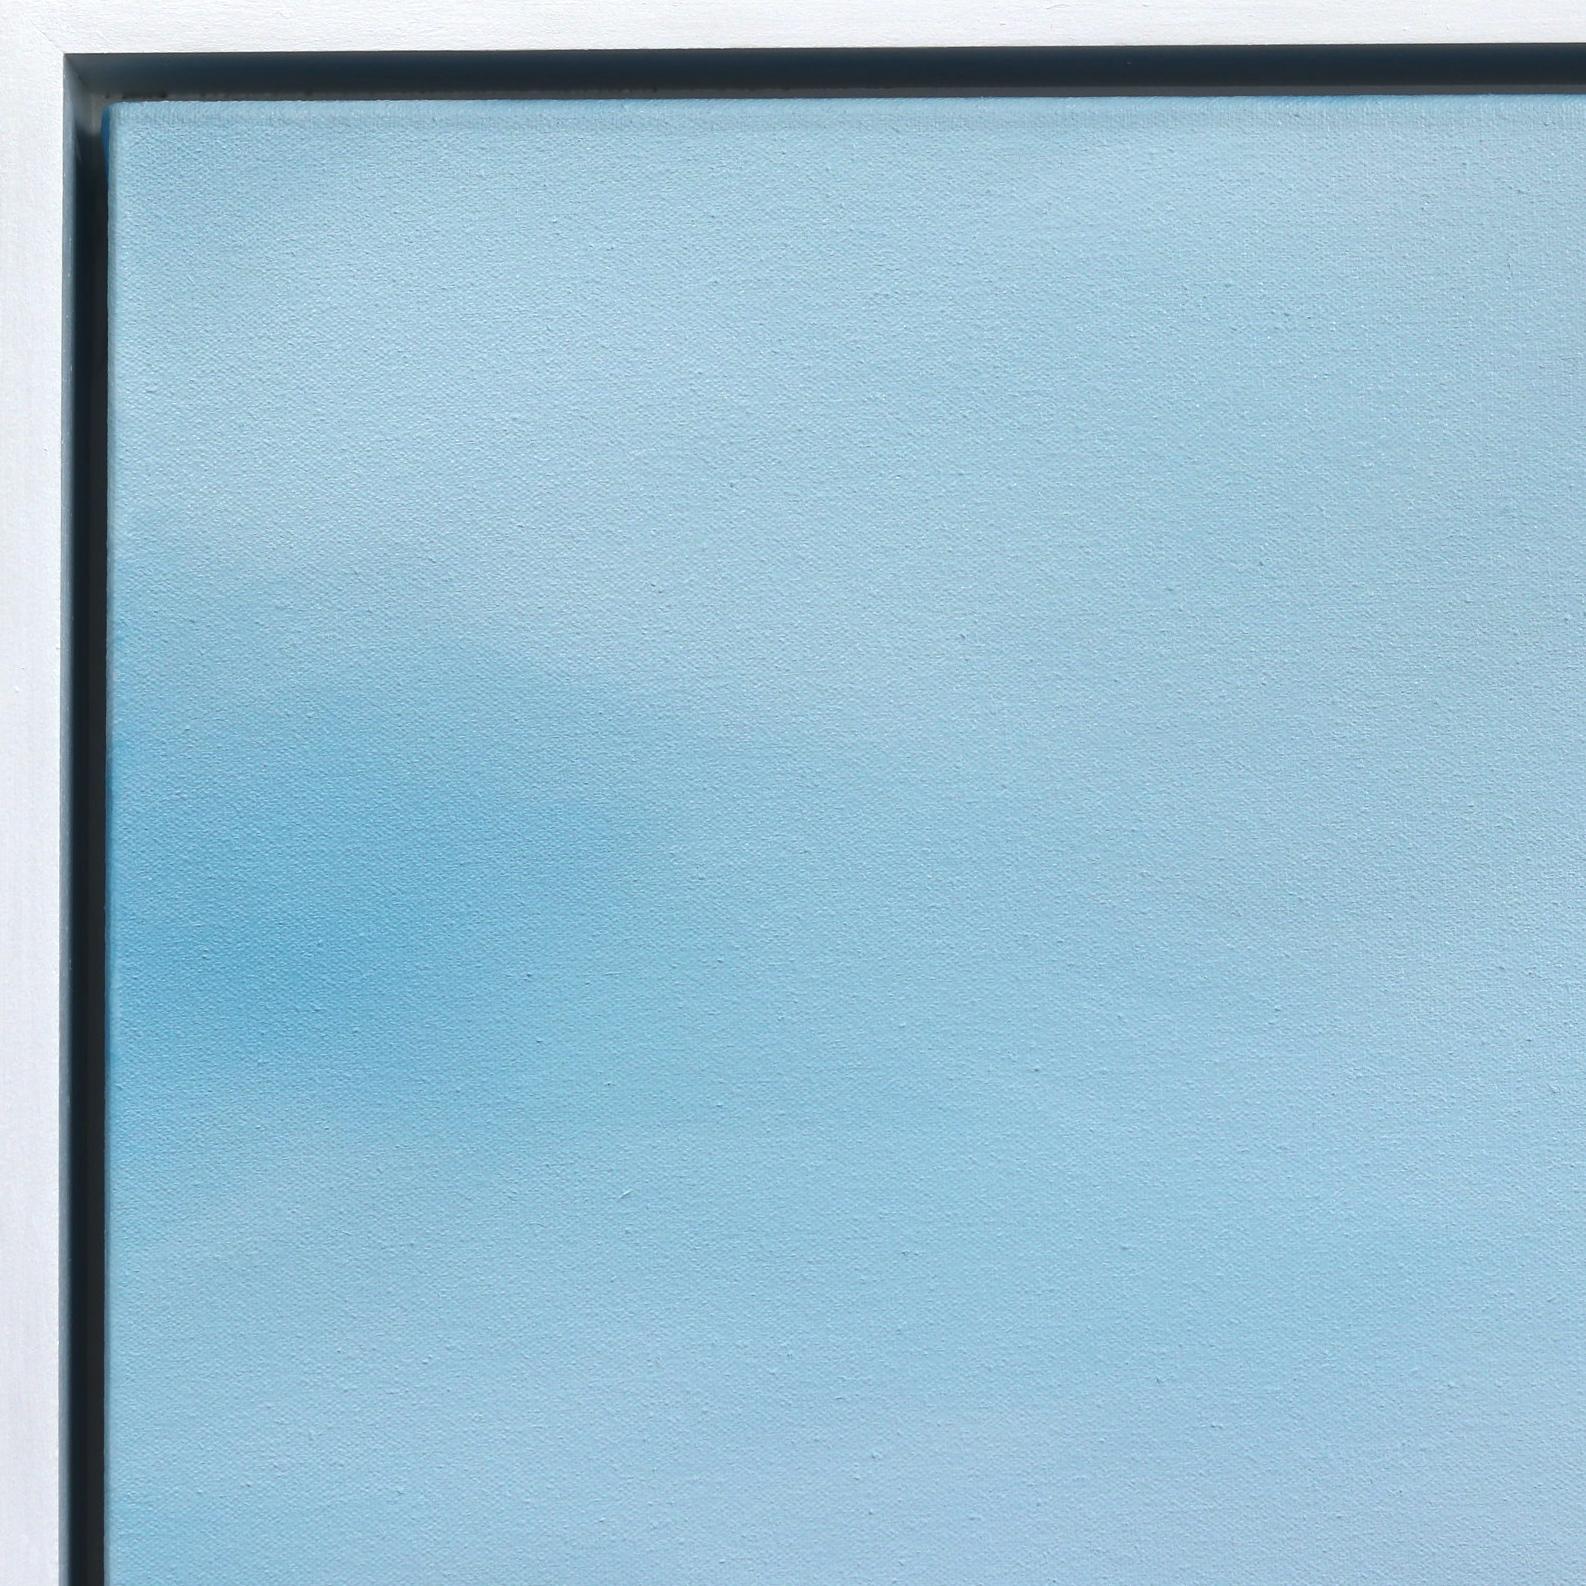 Untitled No. 756 - Framed Contemporary Minimalist Blue Artwork For Sale 3